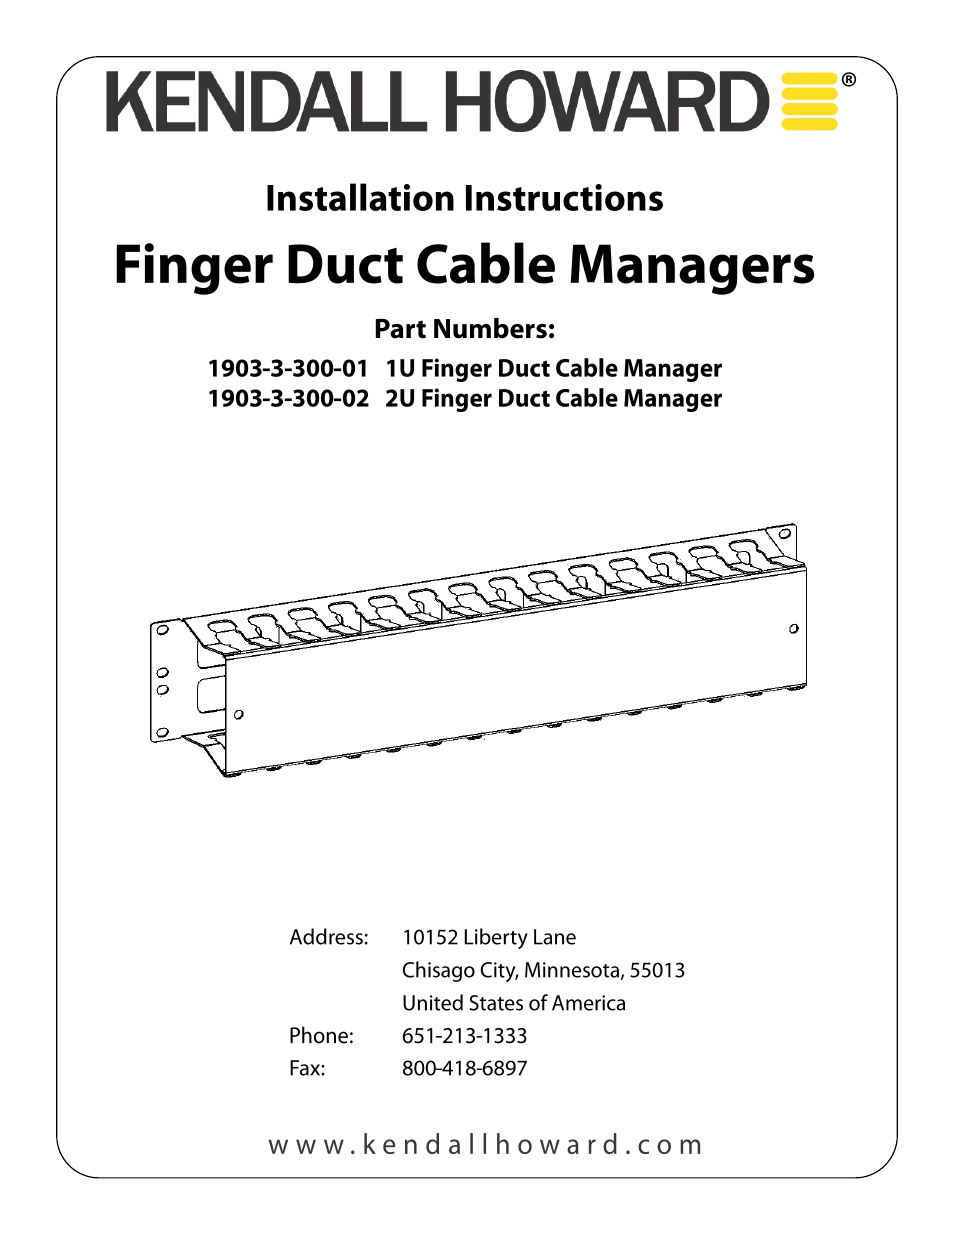 1903-3-300-0x Finger Duct Cable Manager